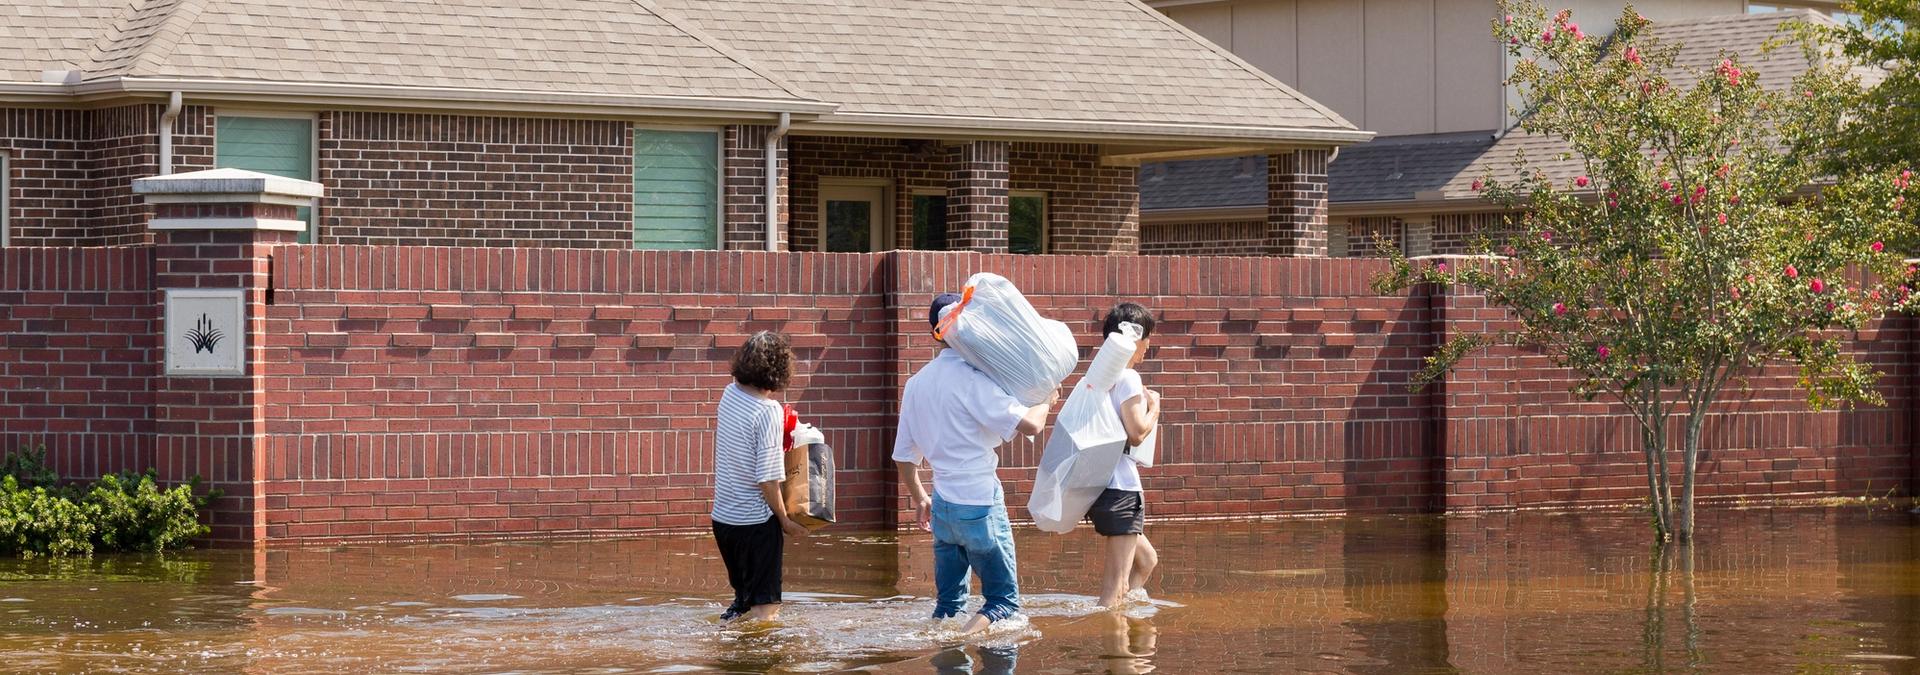 Thousands of respondents told the Texas Flood Registry that their behavioral changes started after the impacts of Hurricane Harvey in 2017.